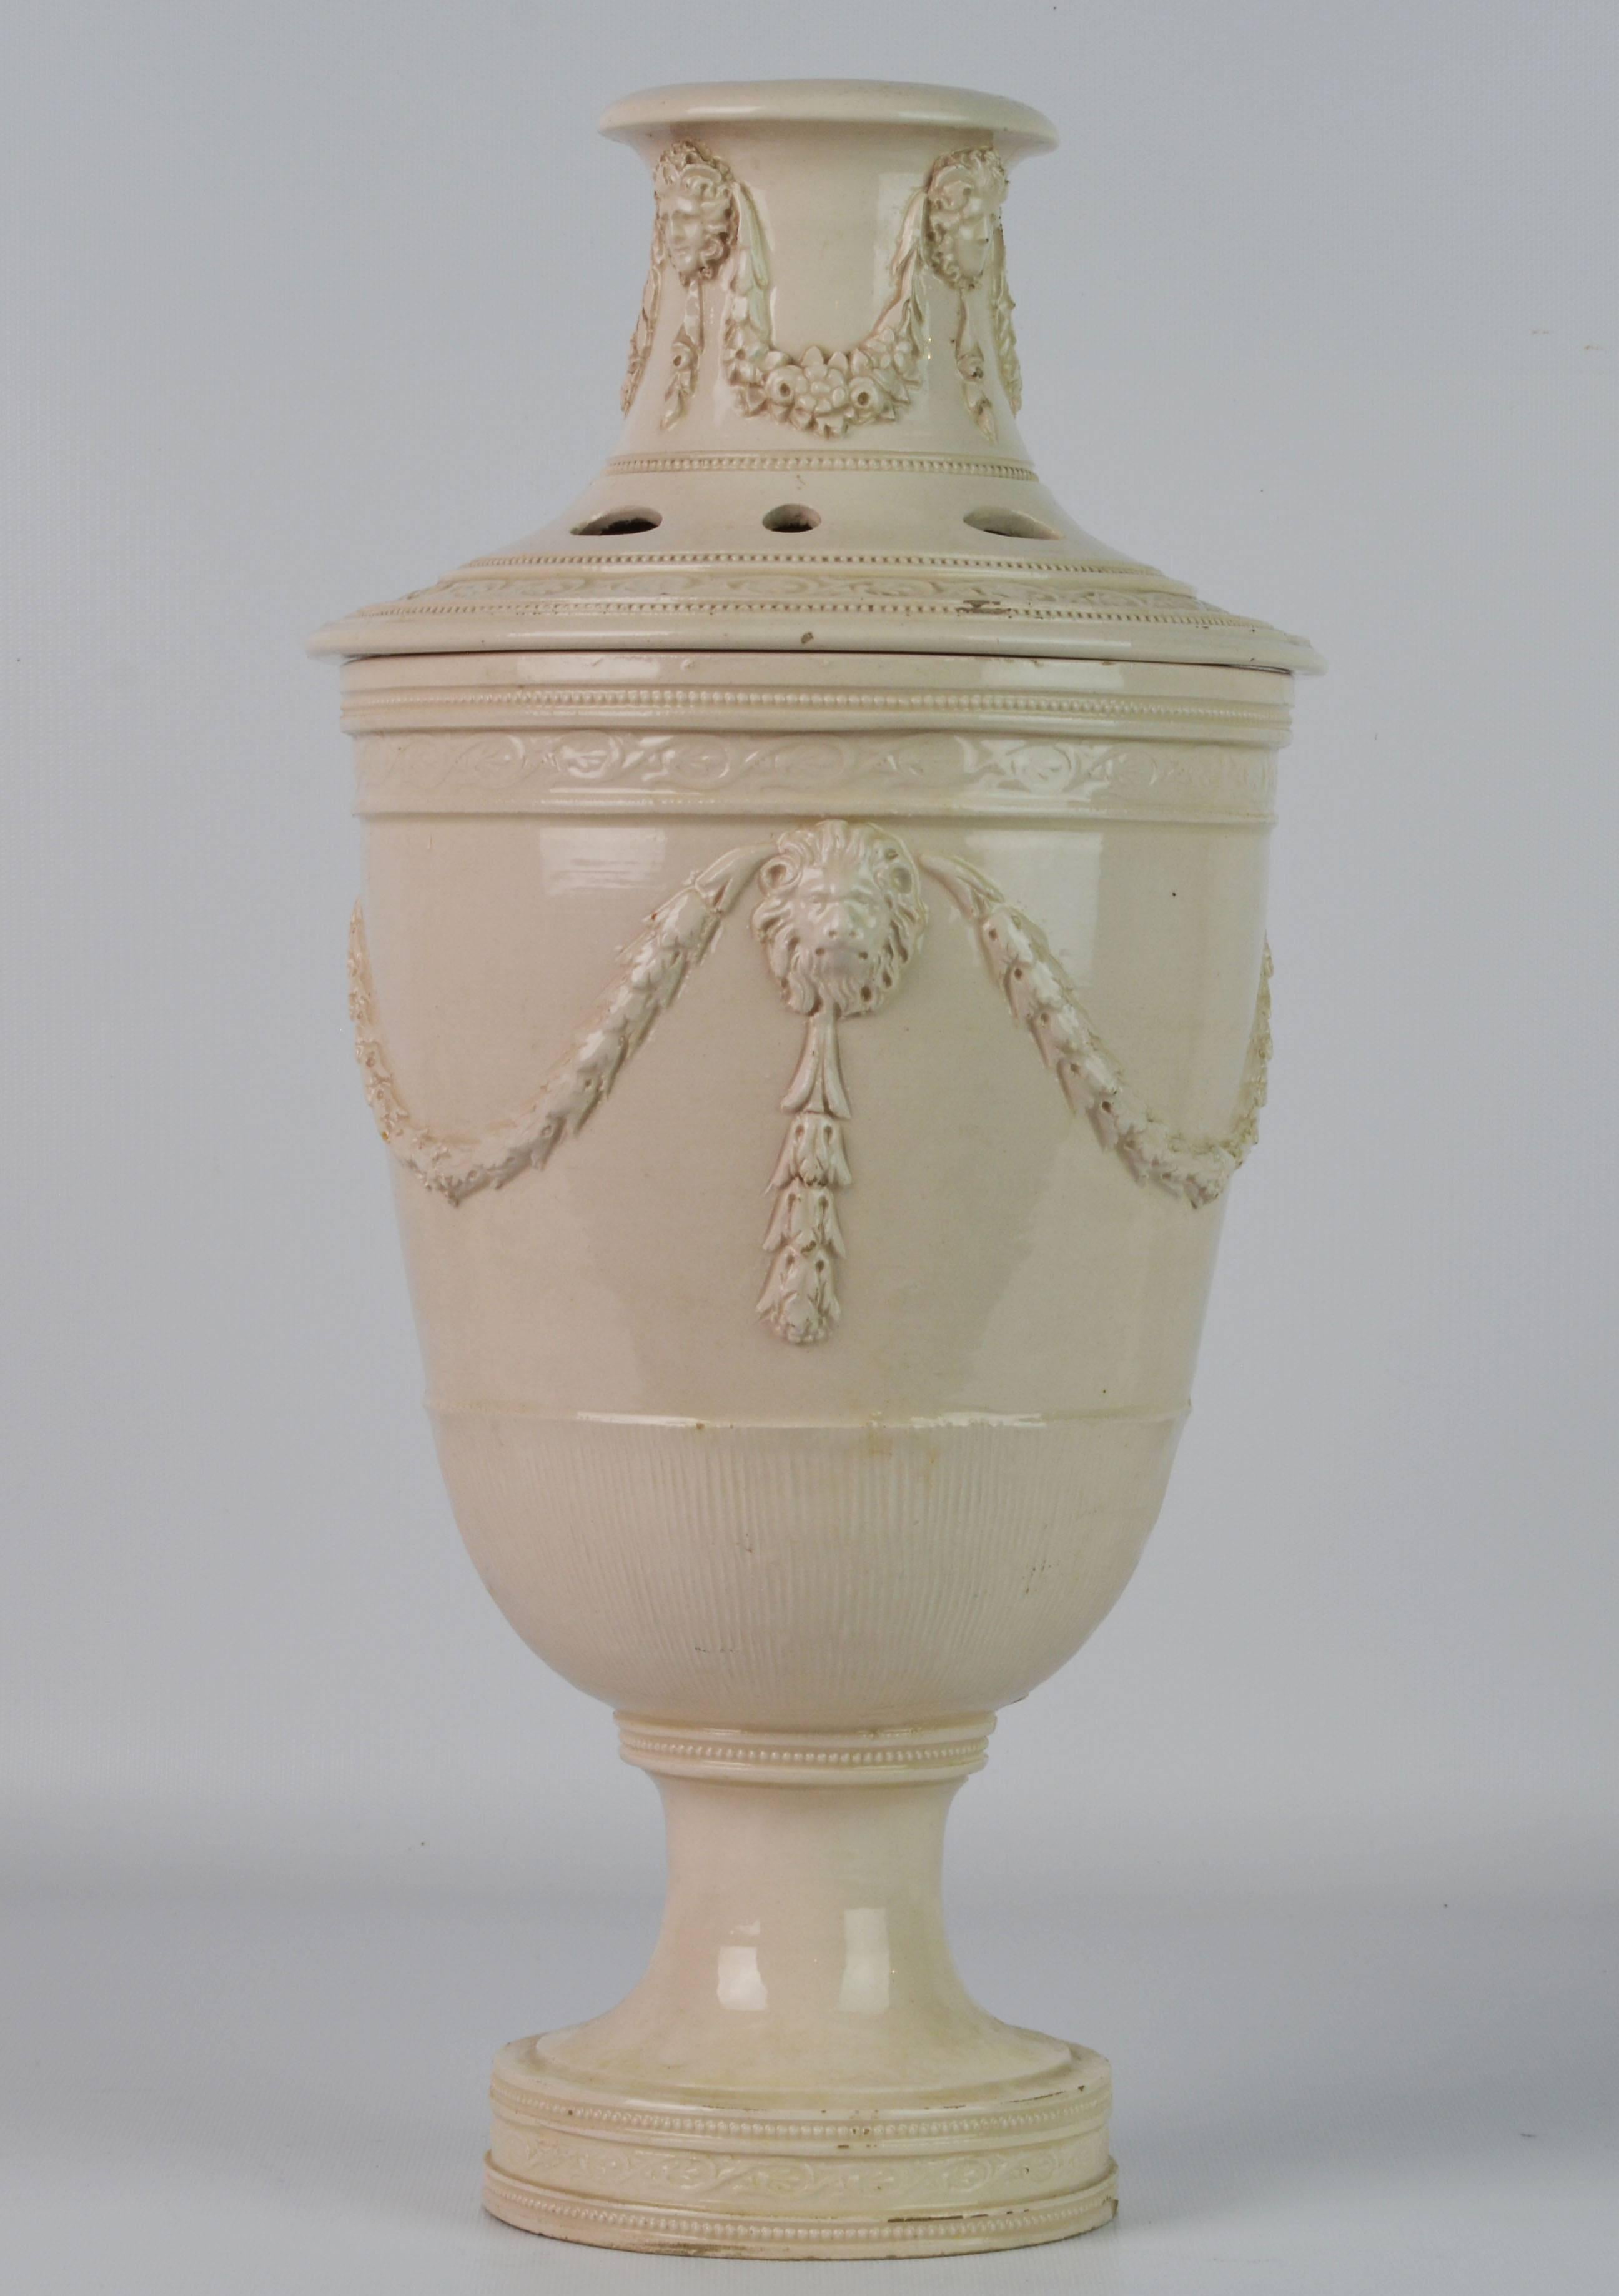 Standing 16 inches tall this rare piece of pottery in the Georgian style (reminiscent of Louis XVI style) could likely be Leeds creamware and consists of the reticulated cover surmounted by an open neck with garlands and masks in relief above the